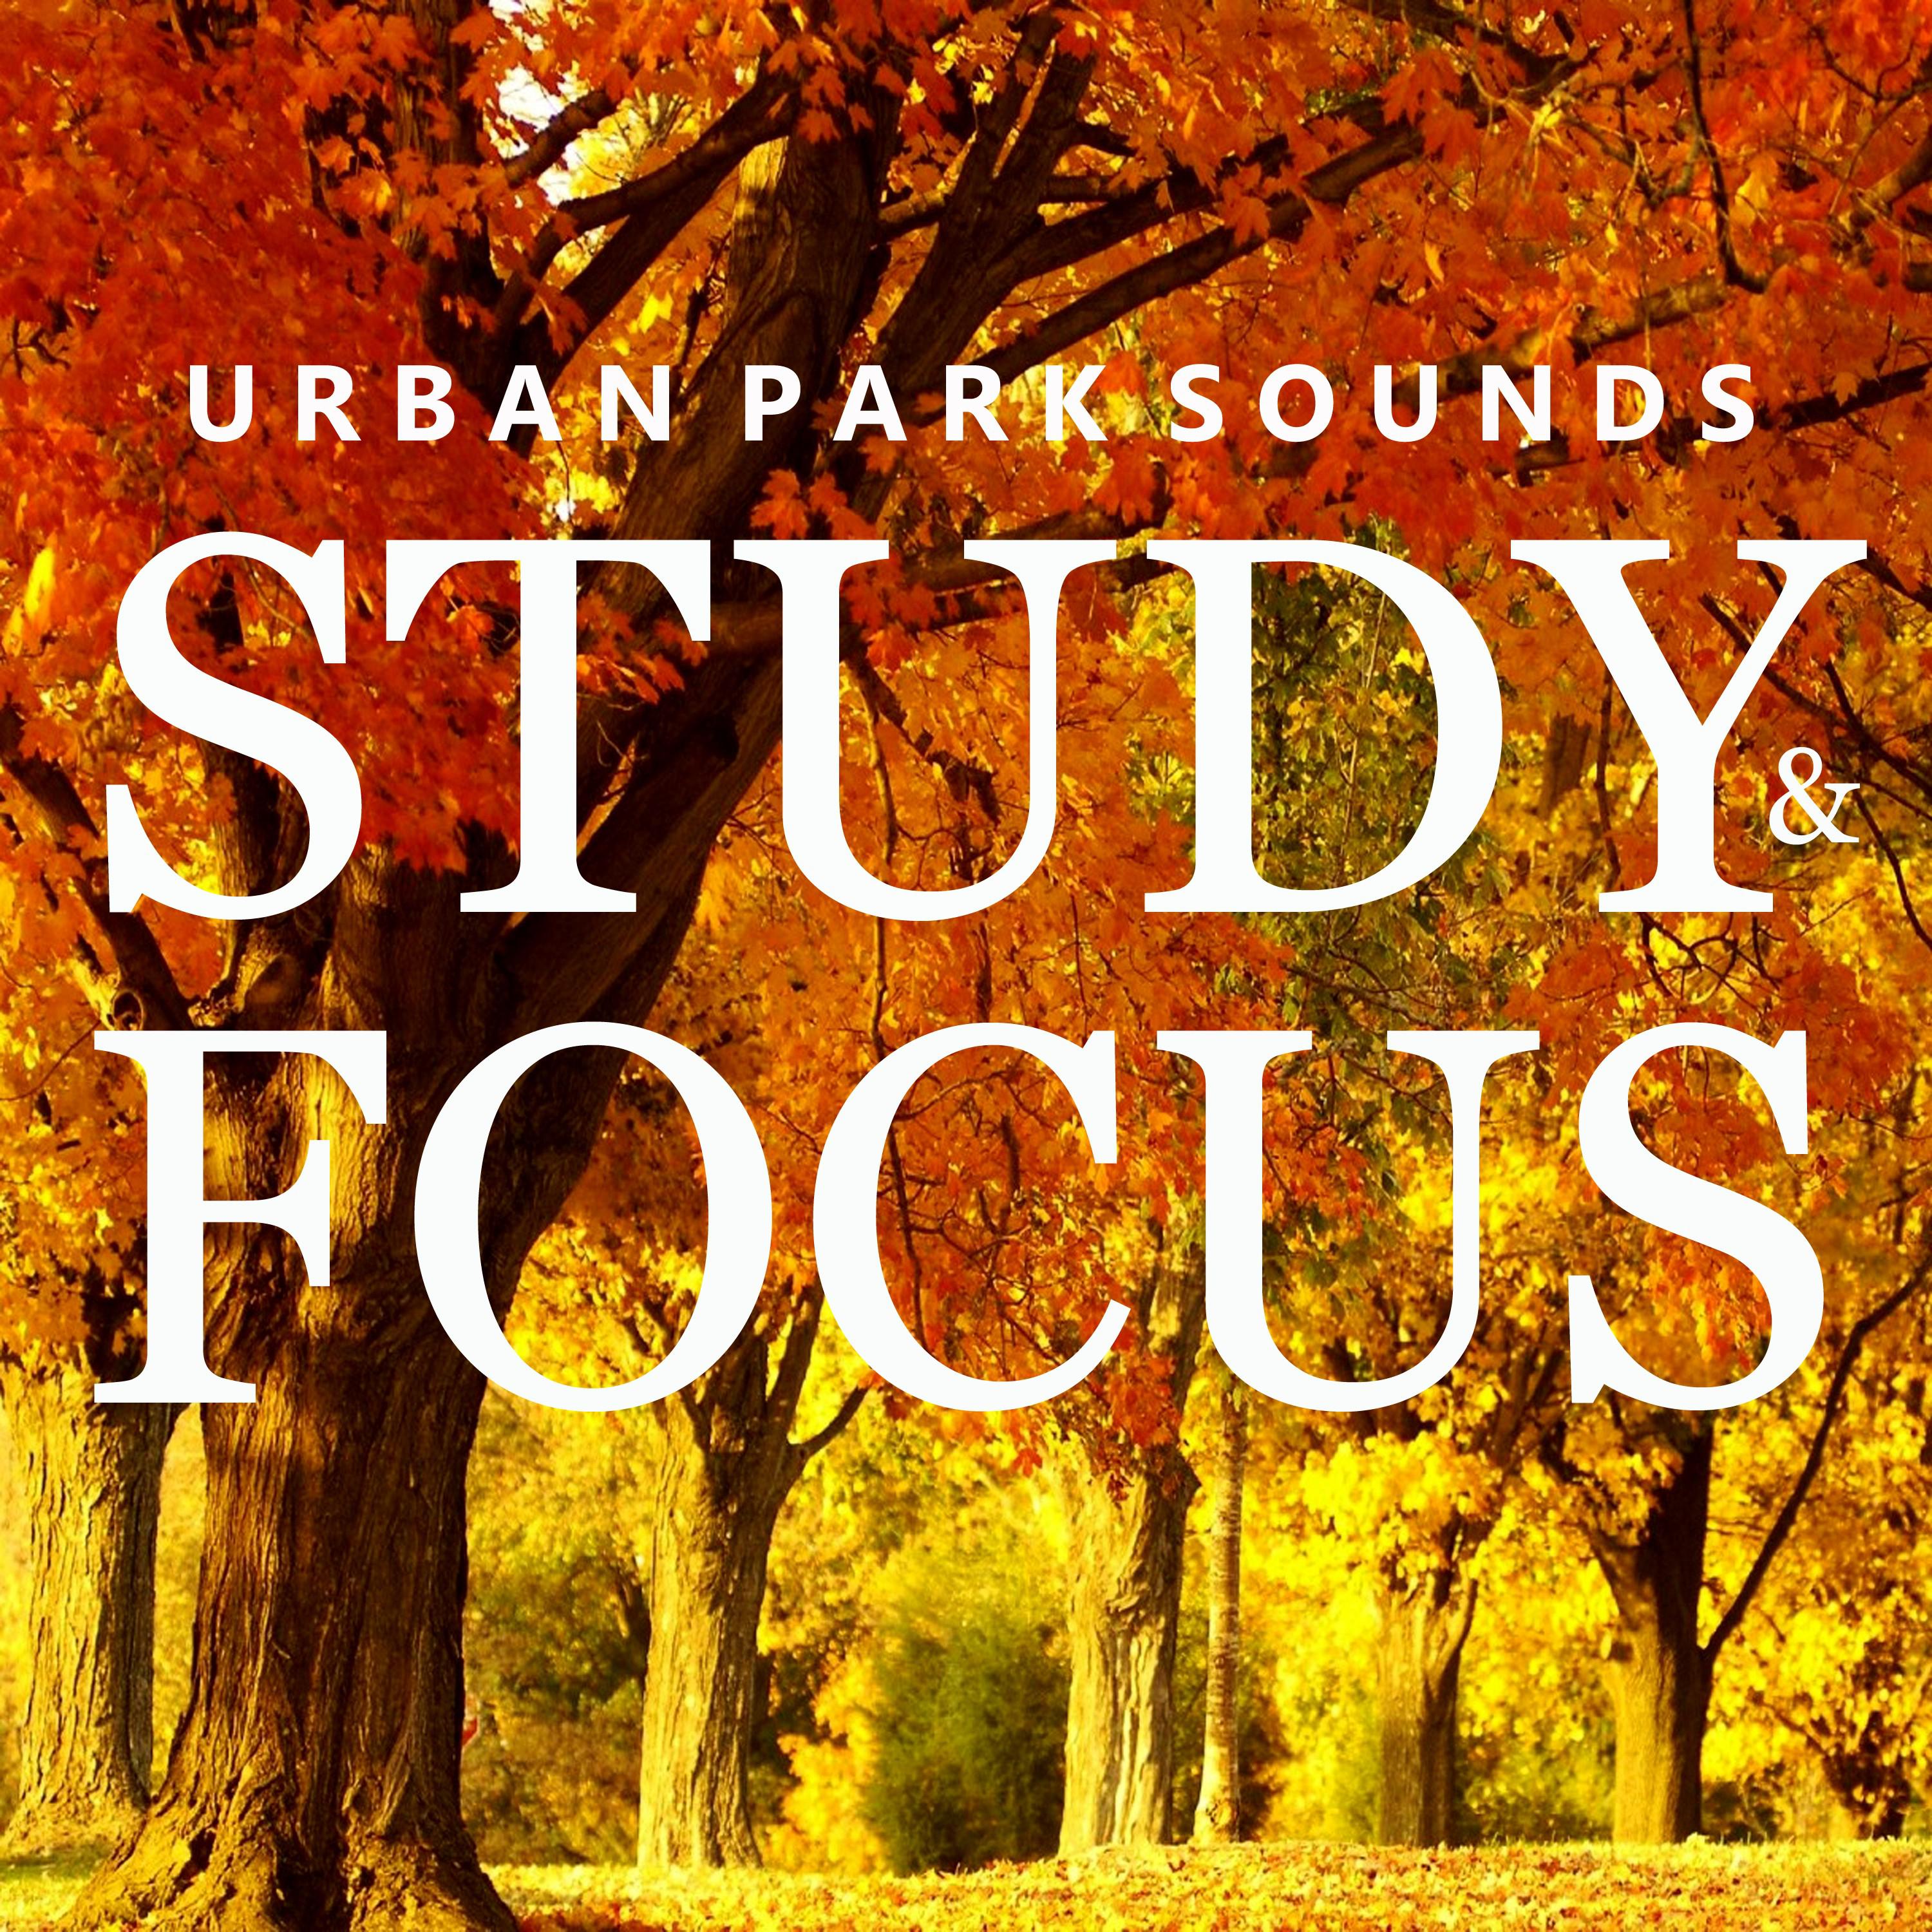 Urban Park Sounds for Studying, Pt. 07